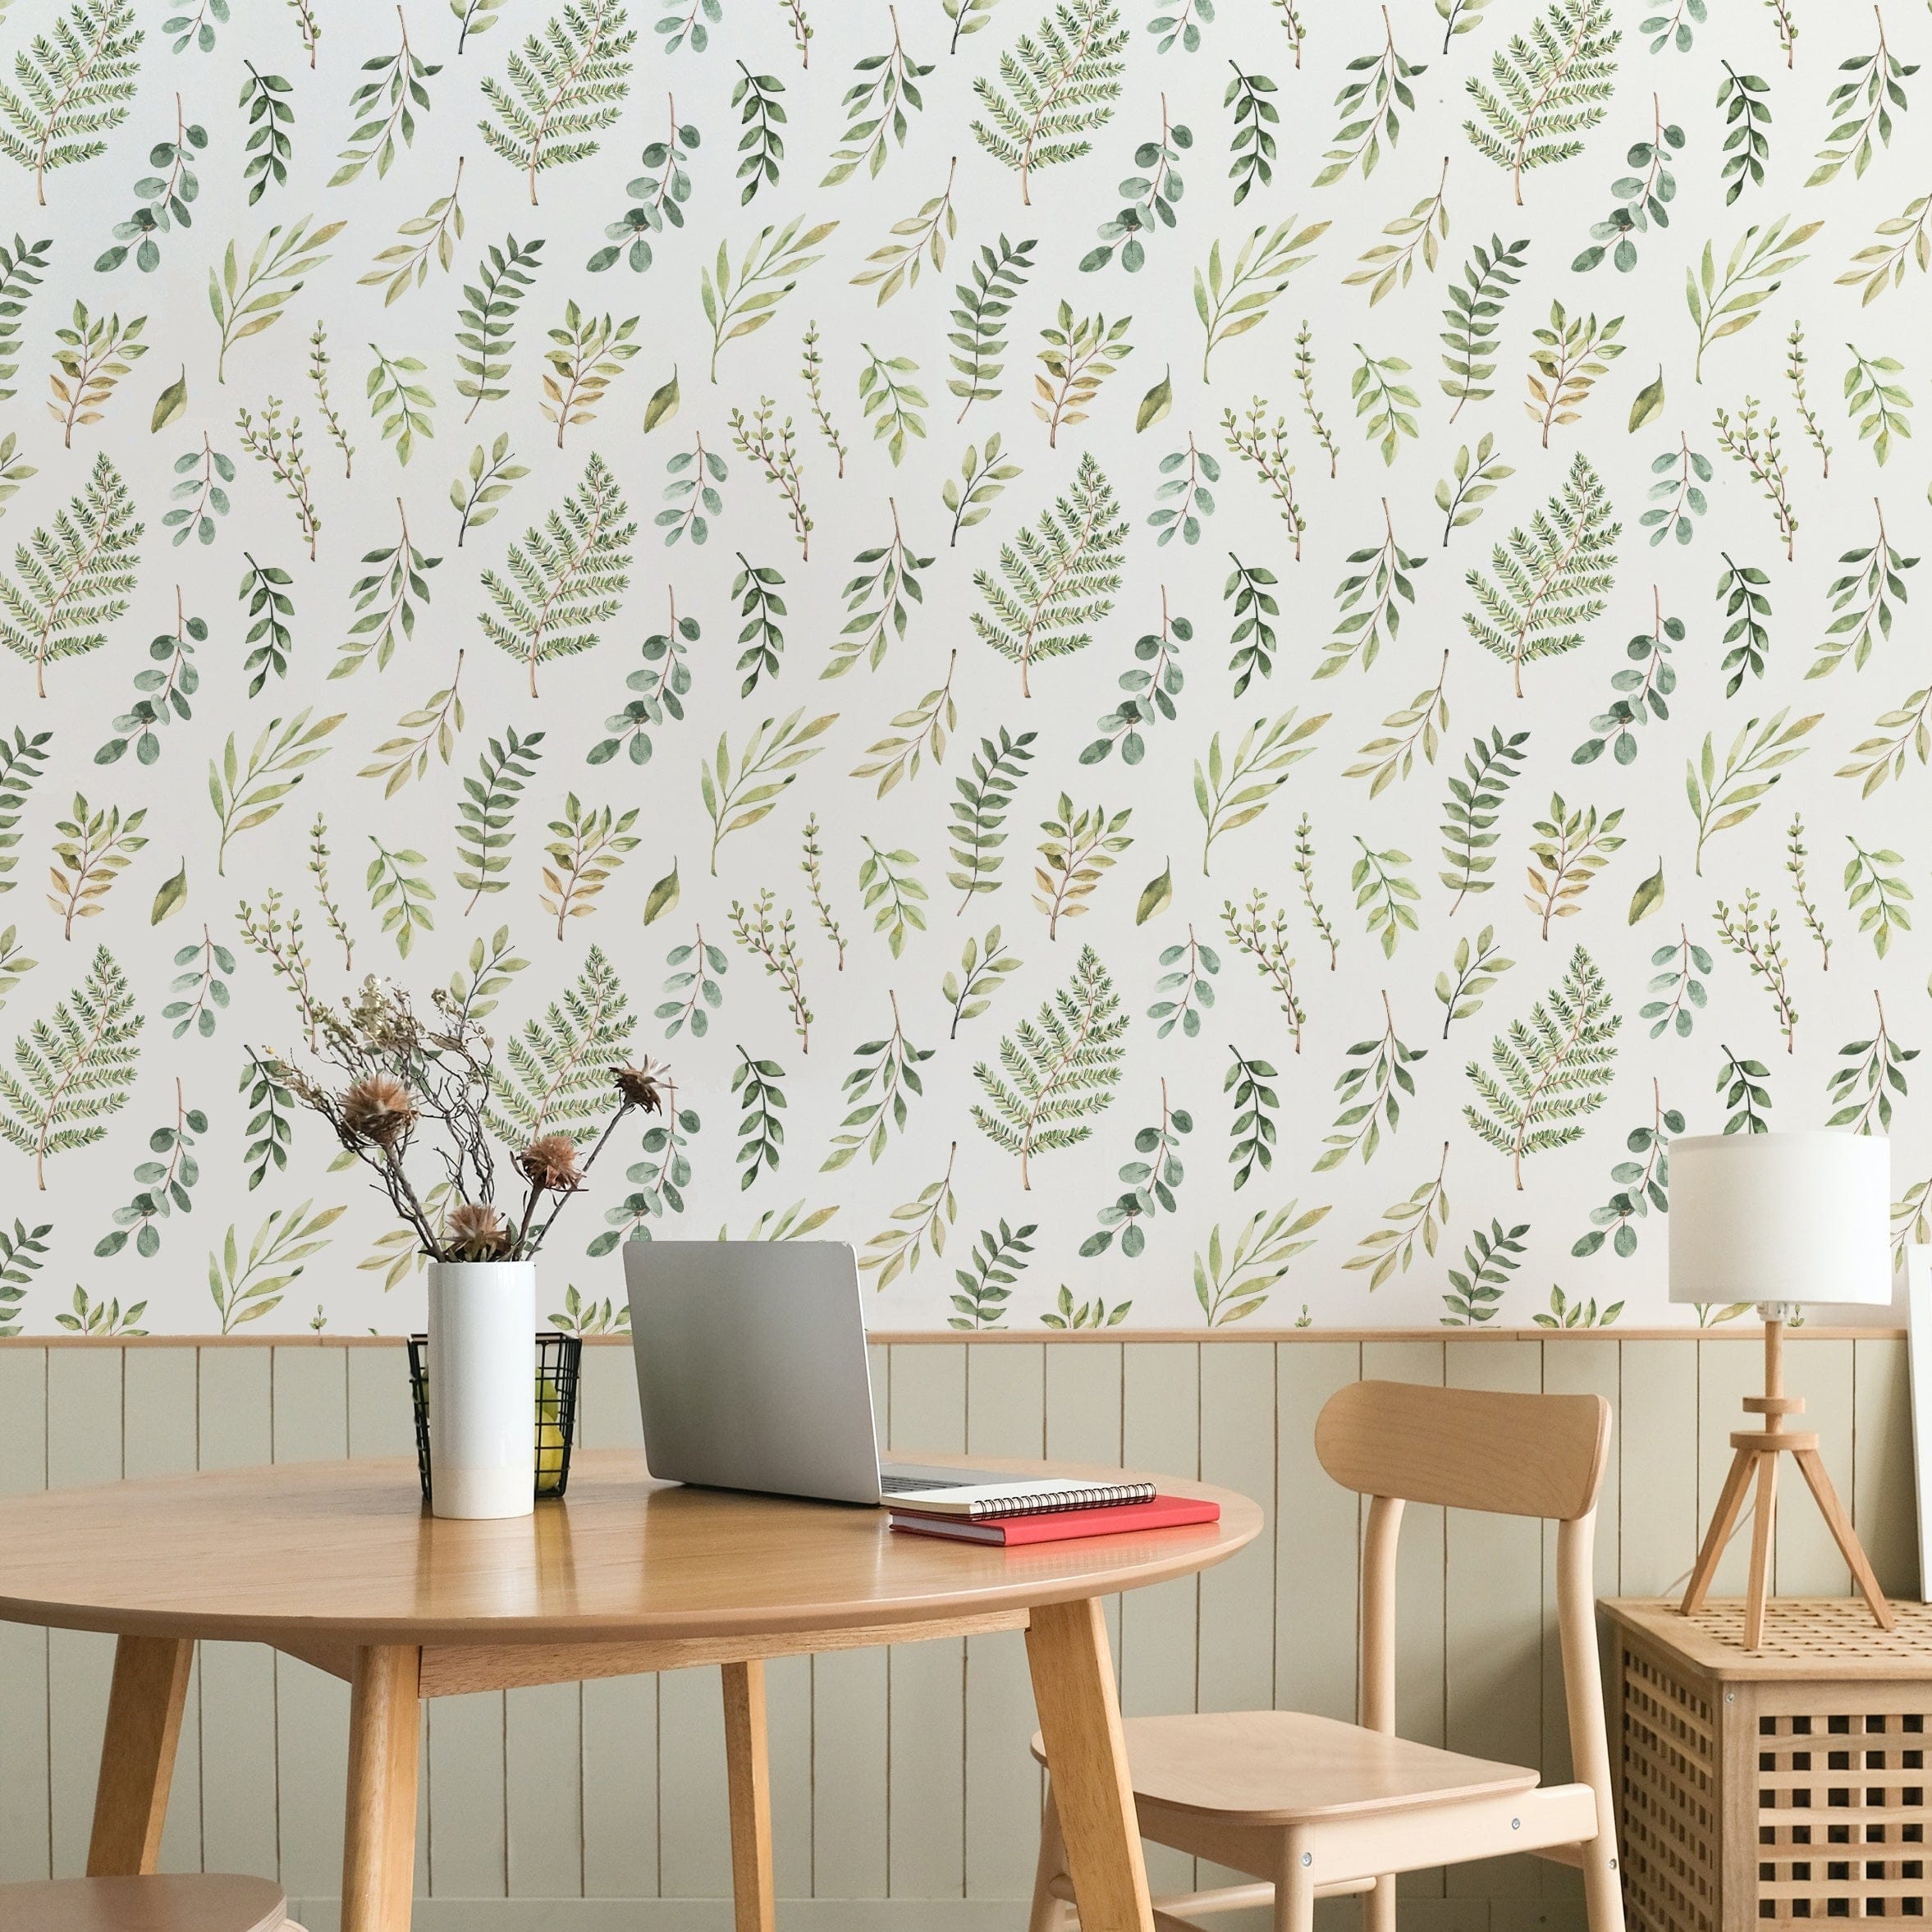 A cozy dining area with a wooden table and chairs, set against a wall decorated with Green Foliage Wallpaper, featuring hand-drawn green leaves and branches on a white background.